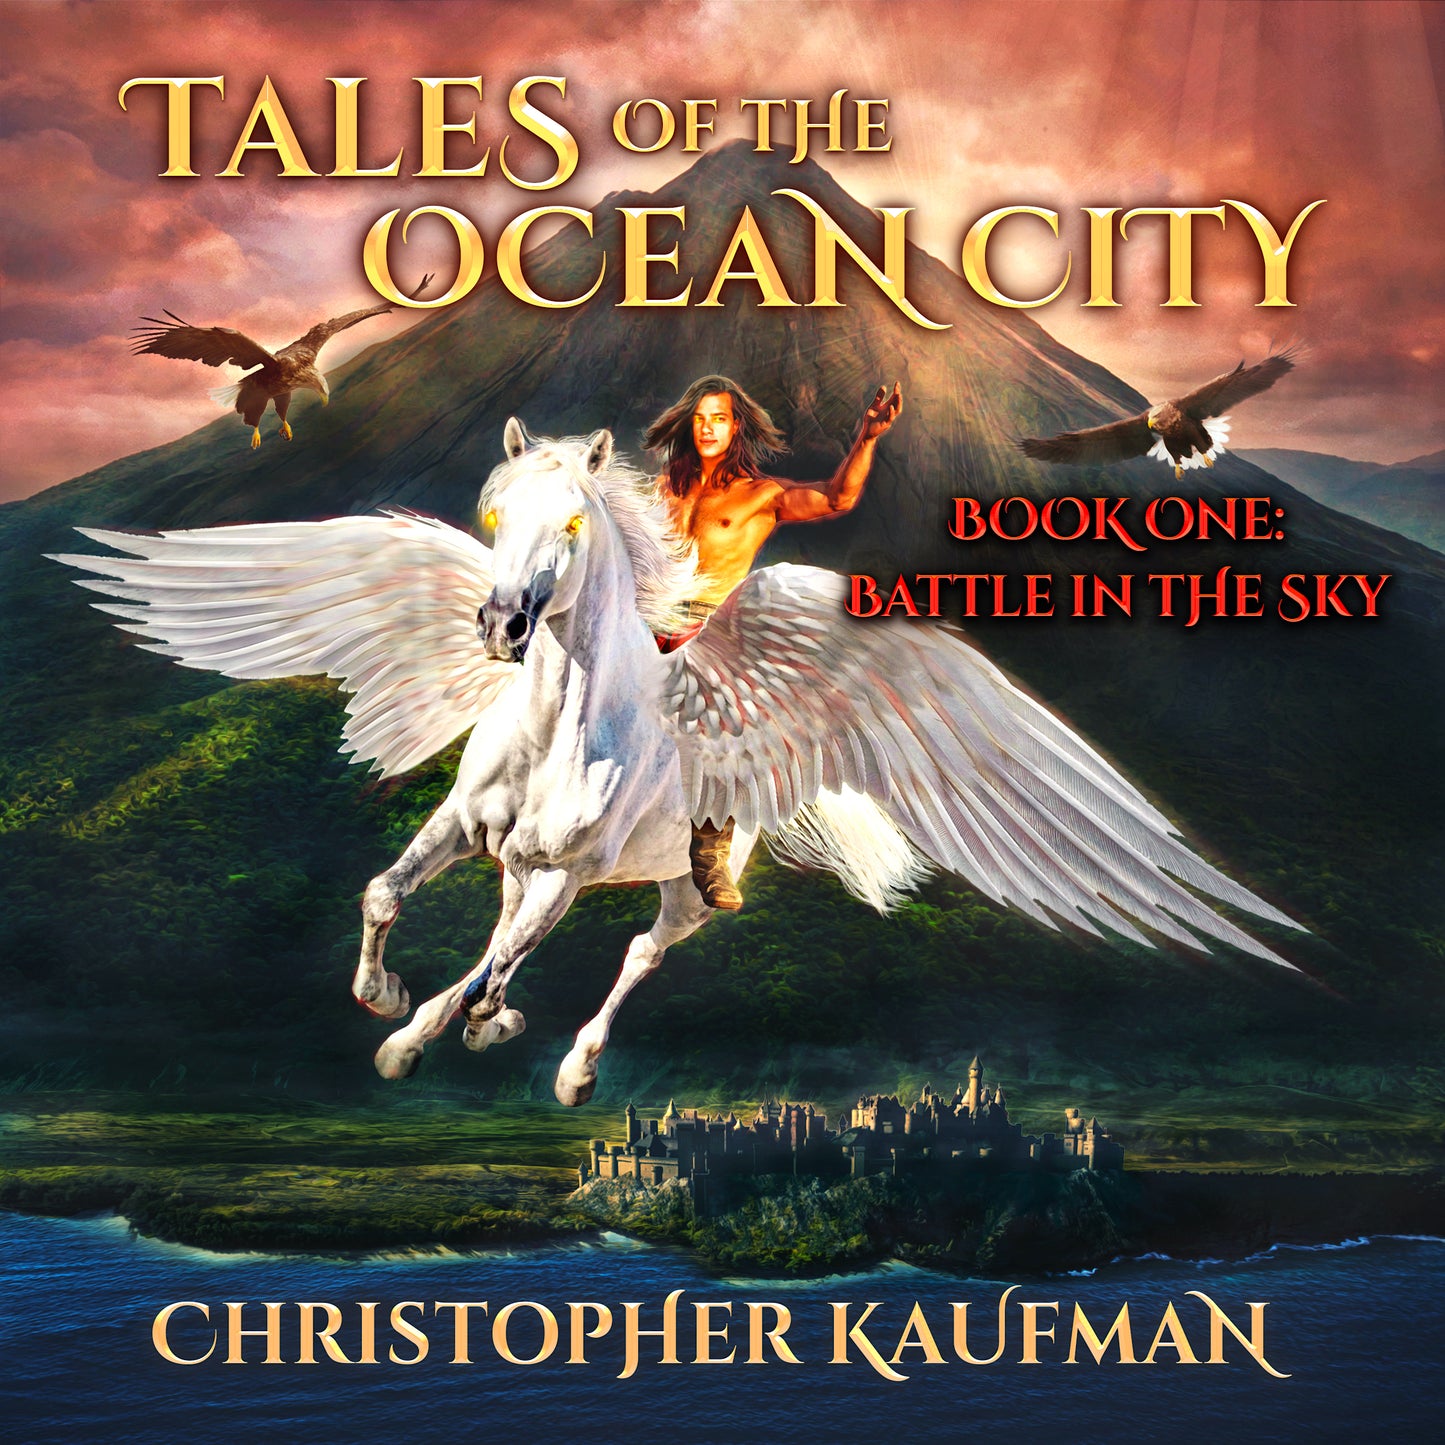 TALES OF THE OCEAN CITY - Book One: Battle In The Sky